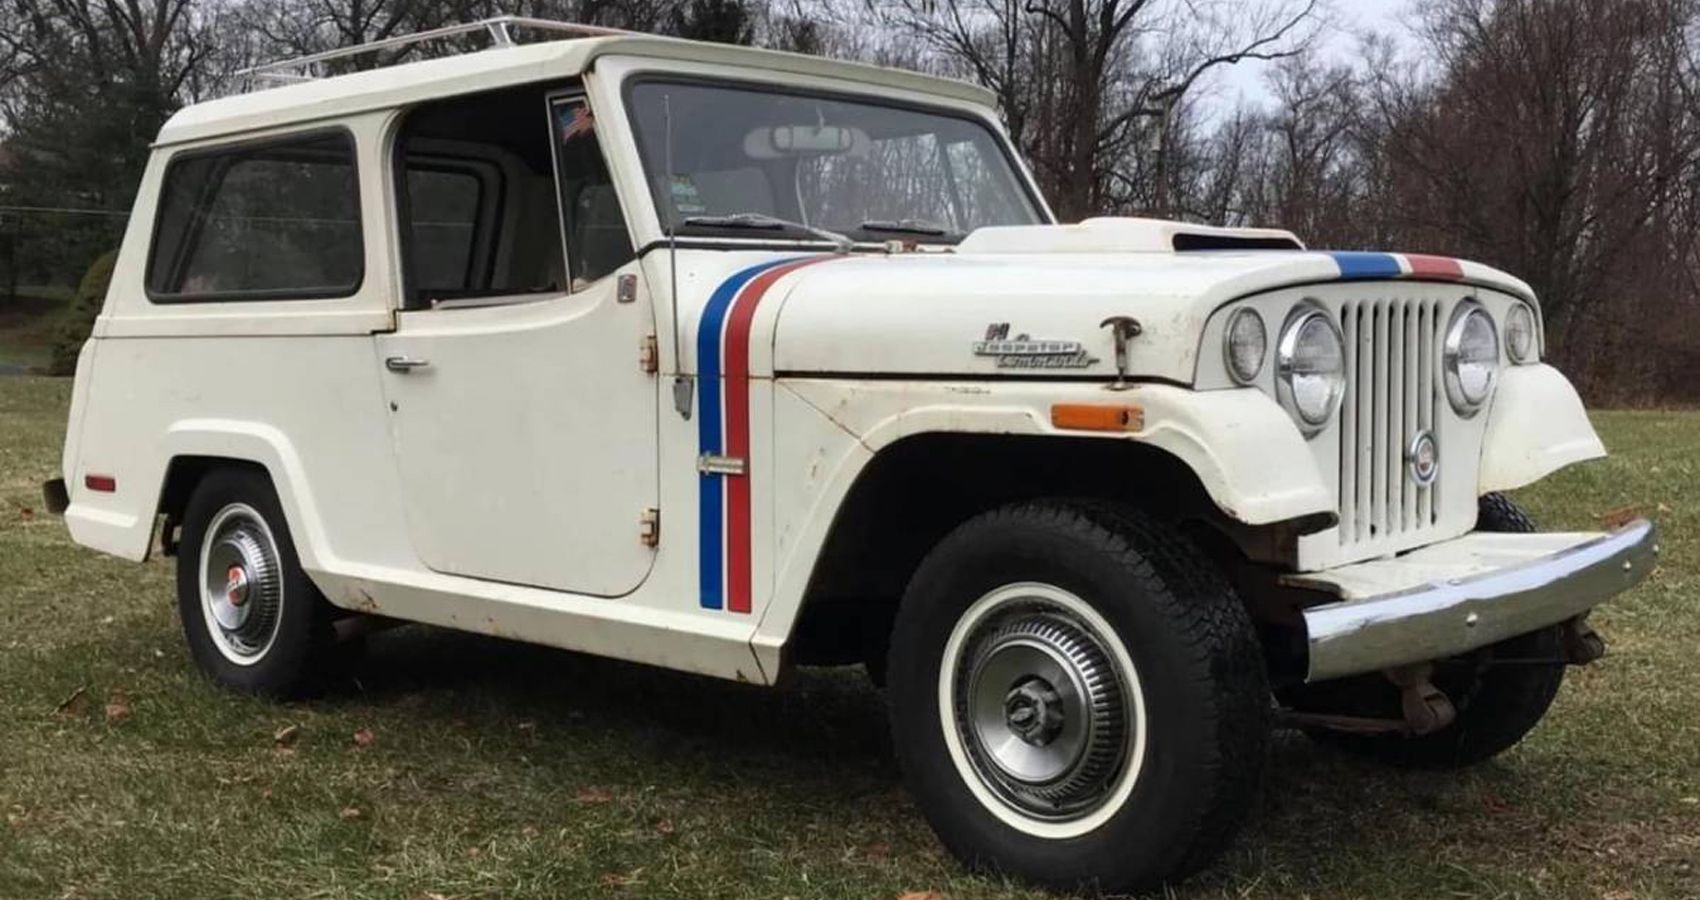 This Barn Find 1971 Jeepster Hurst Is A Great Project Car